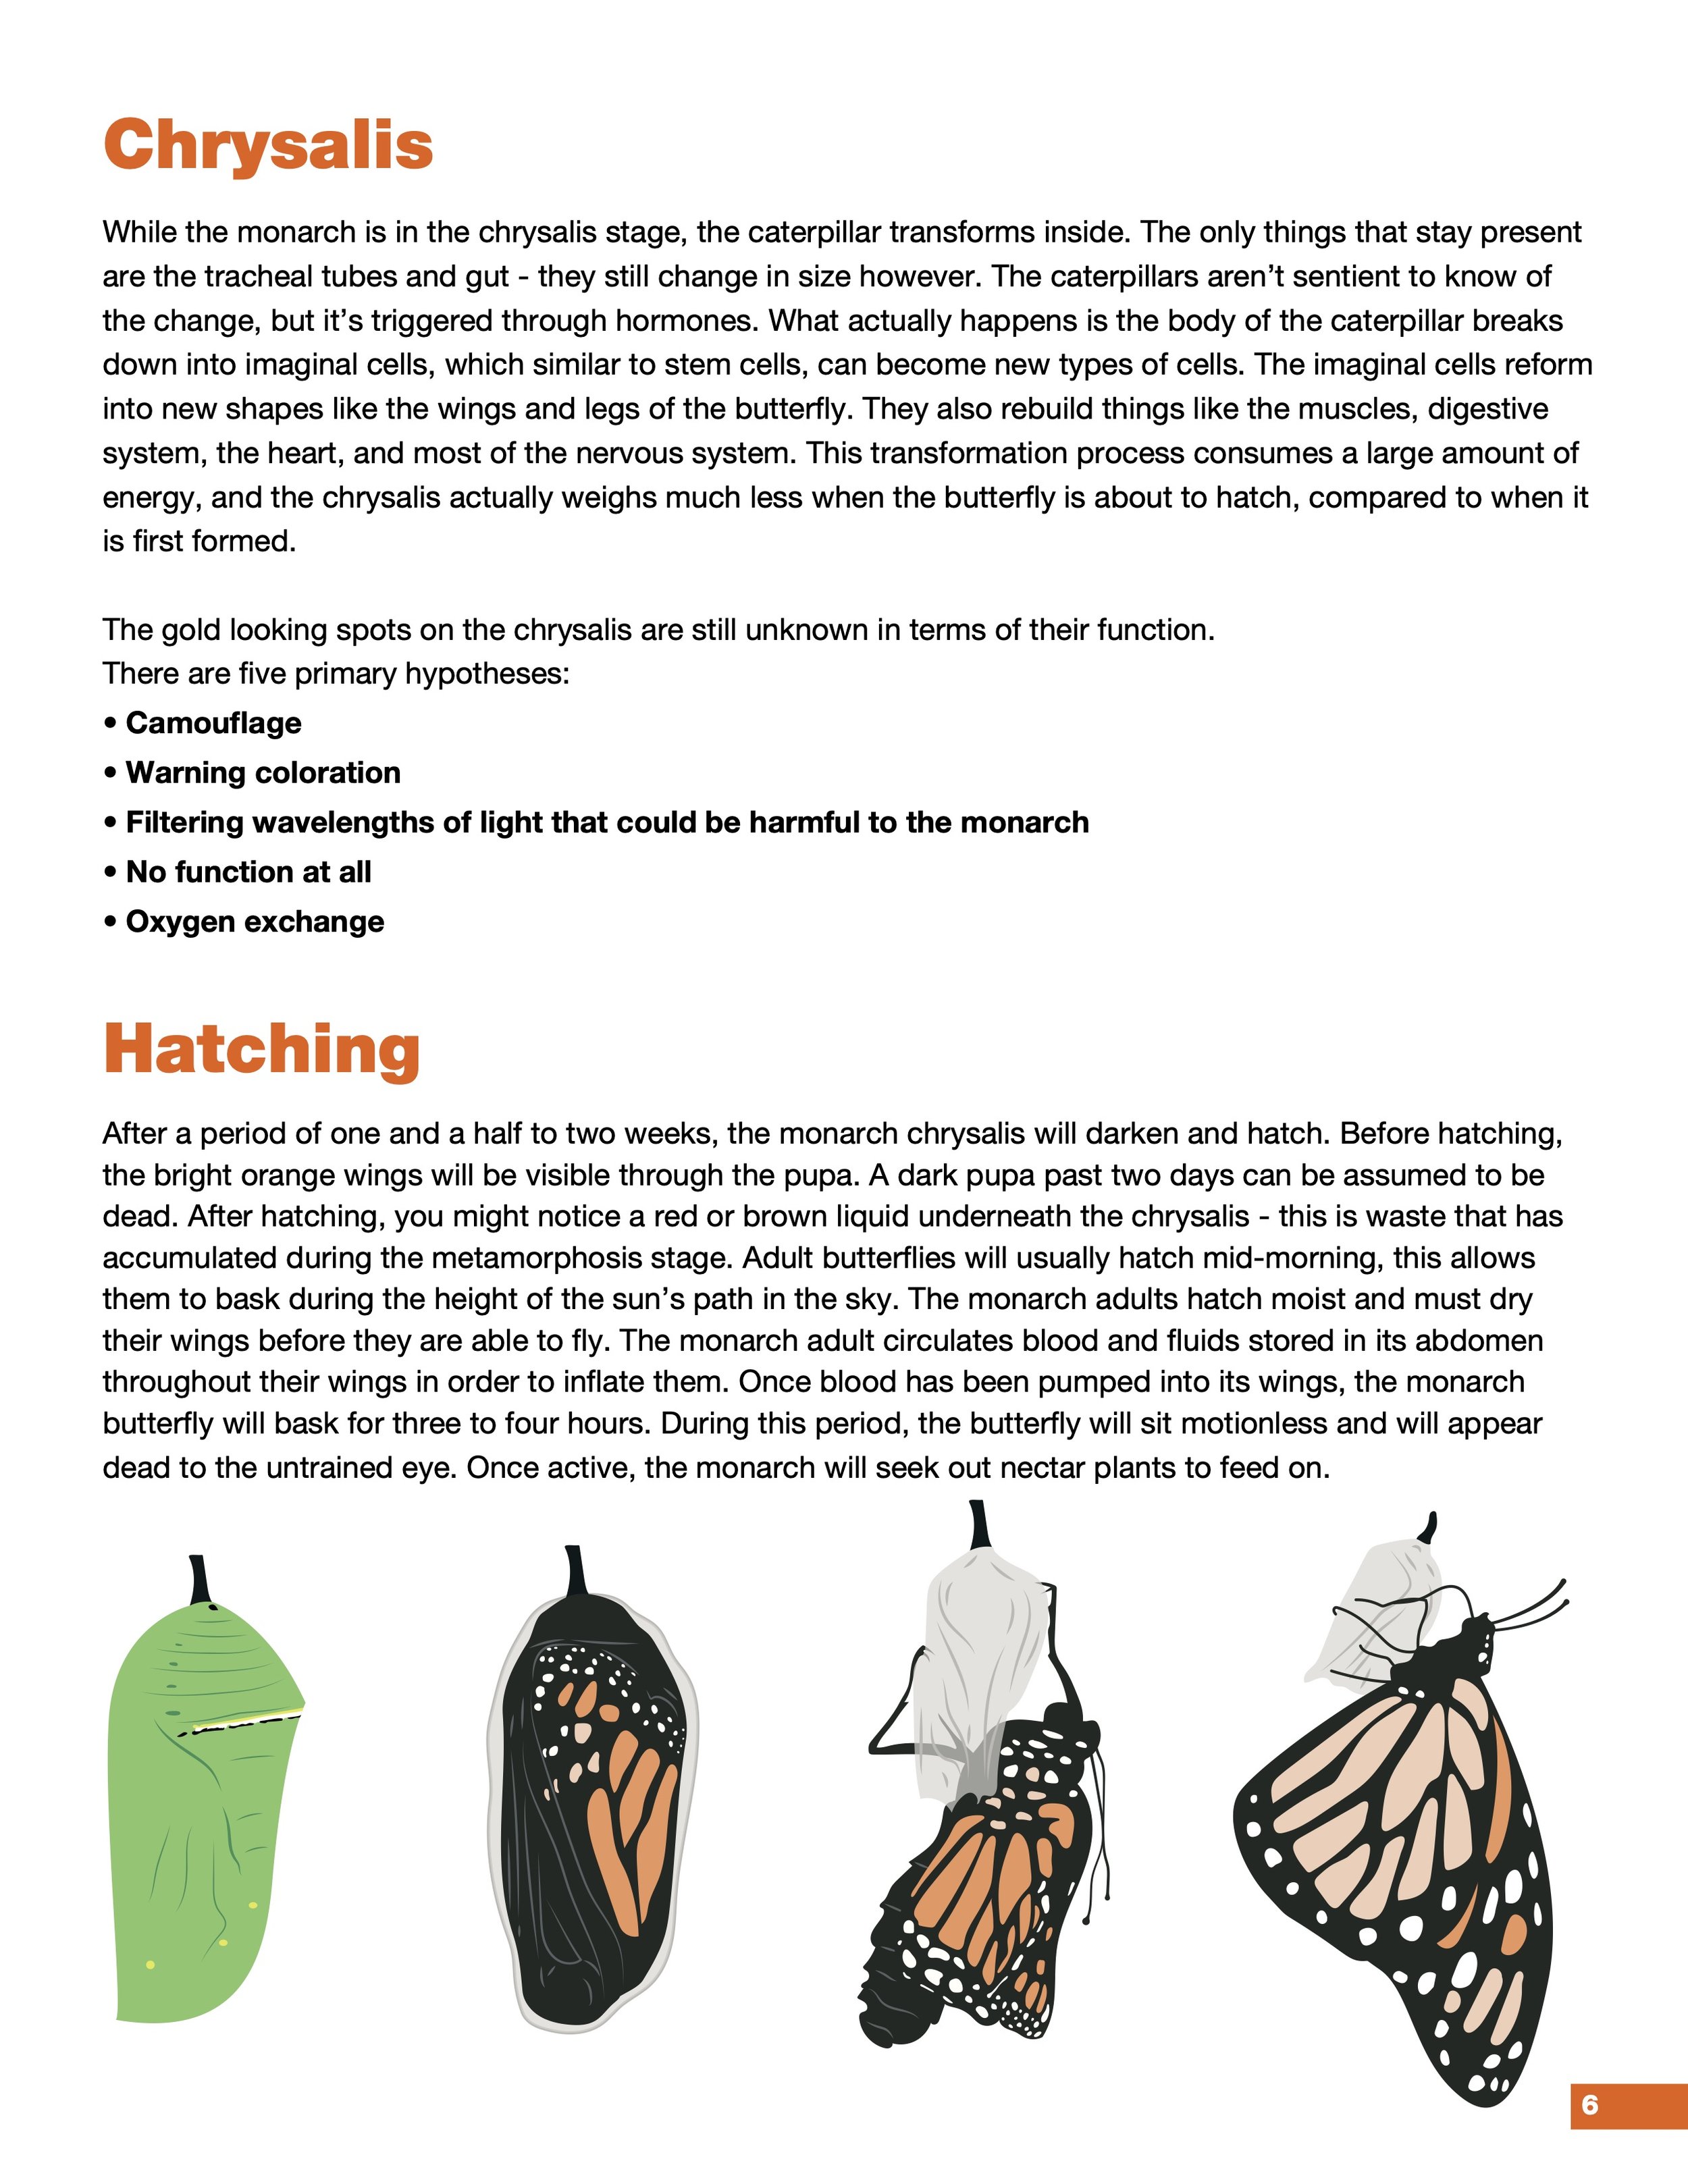 Chrysalis and hatching